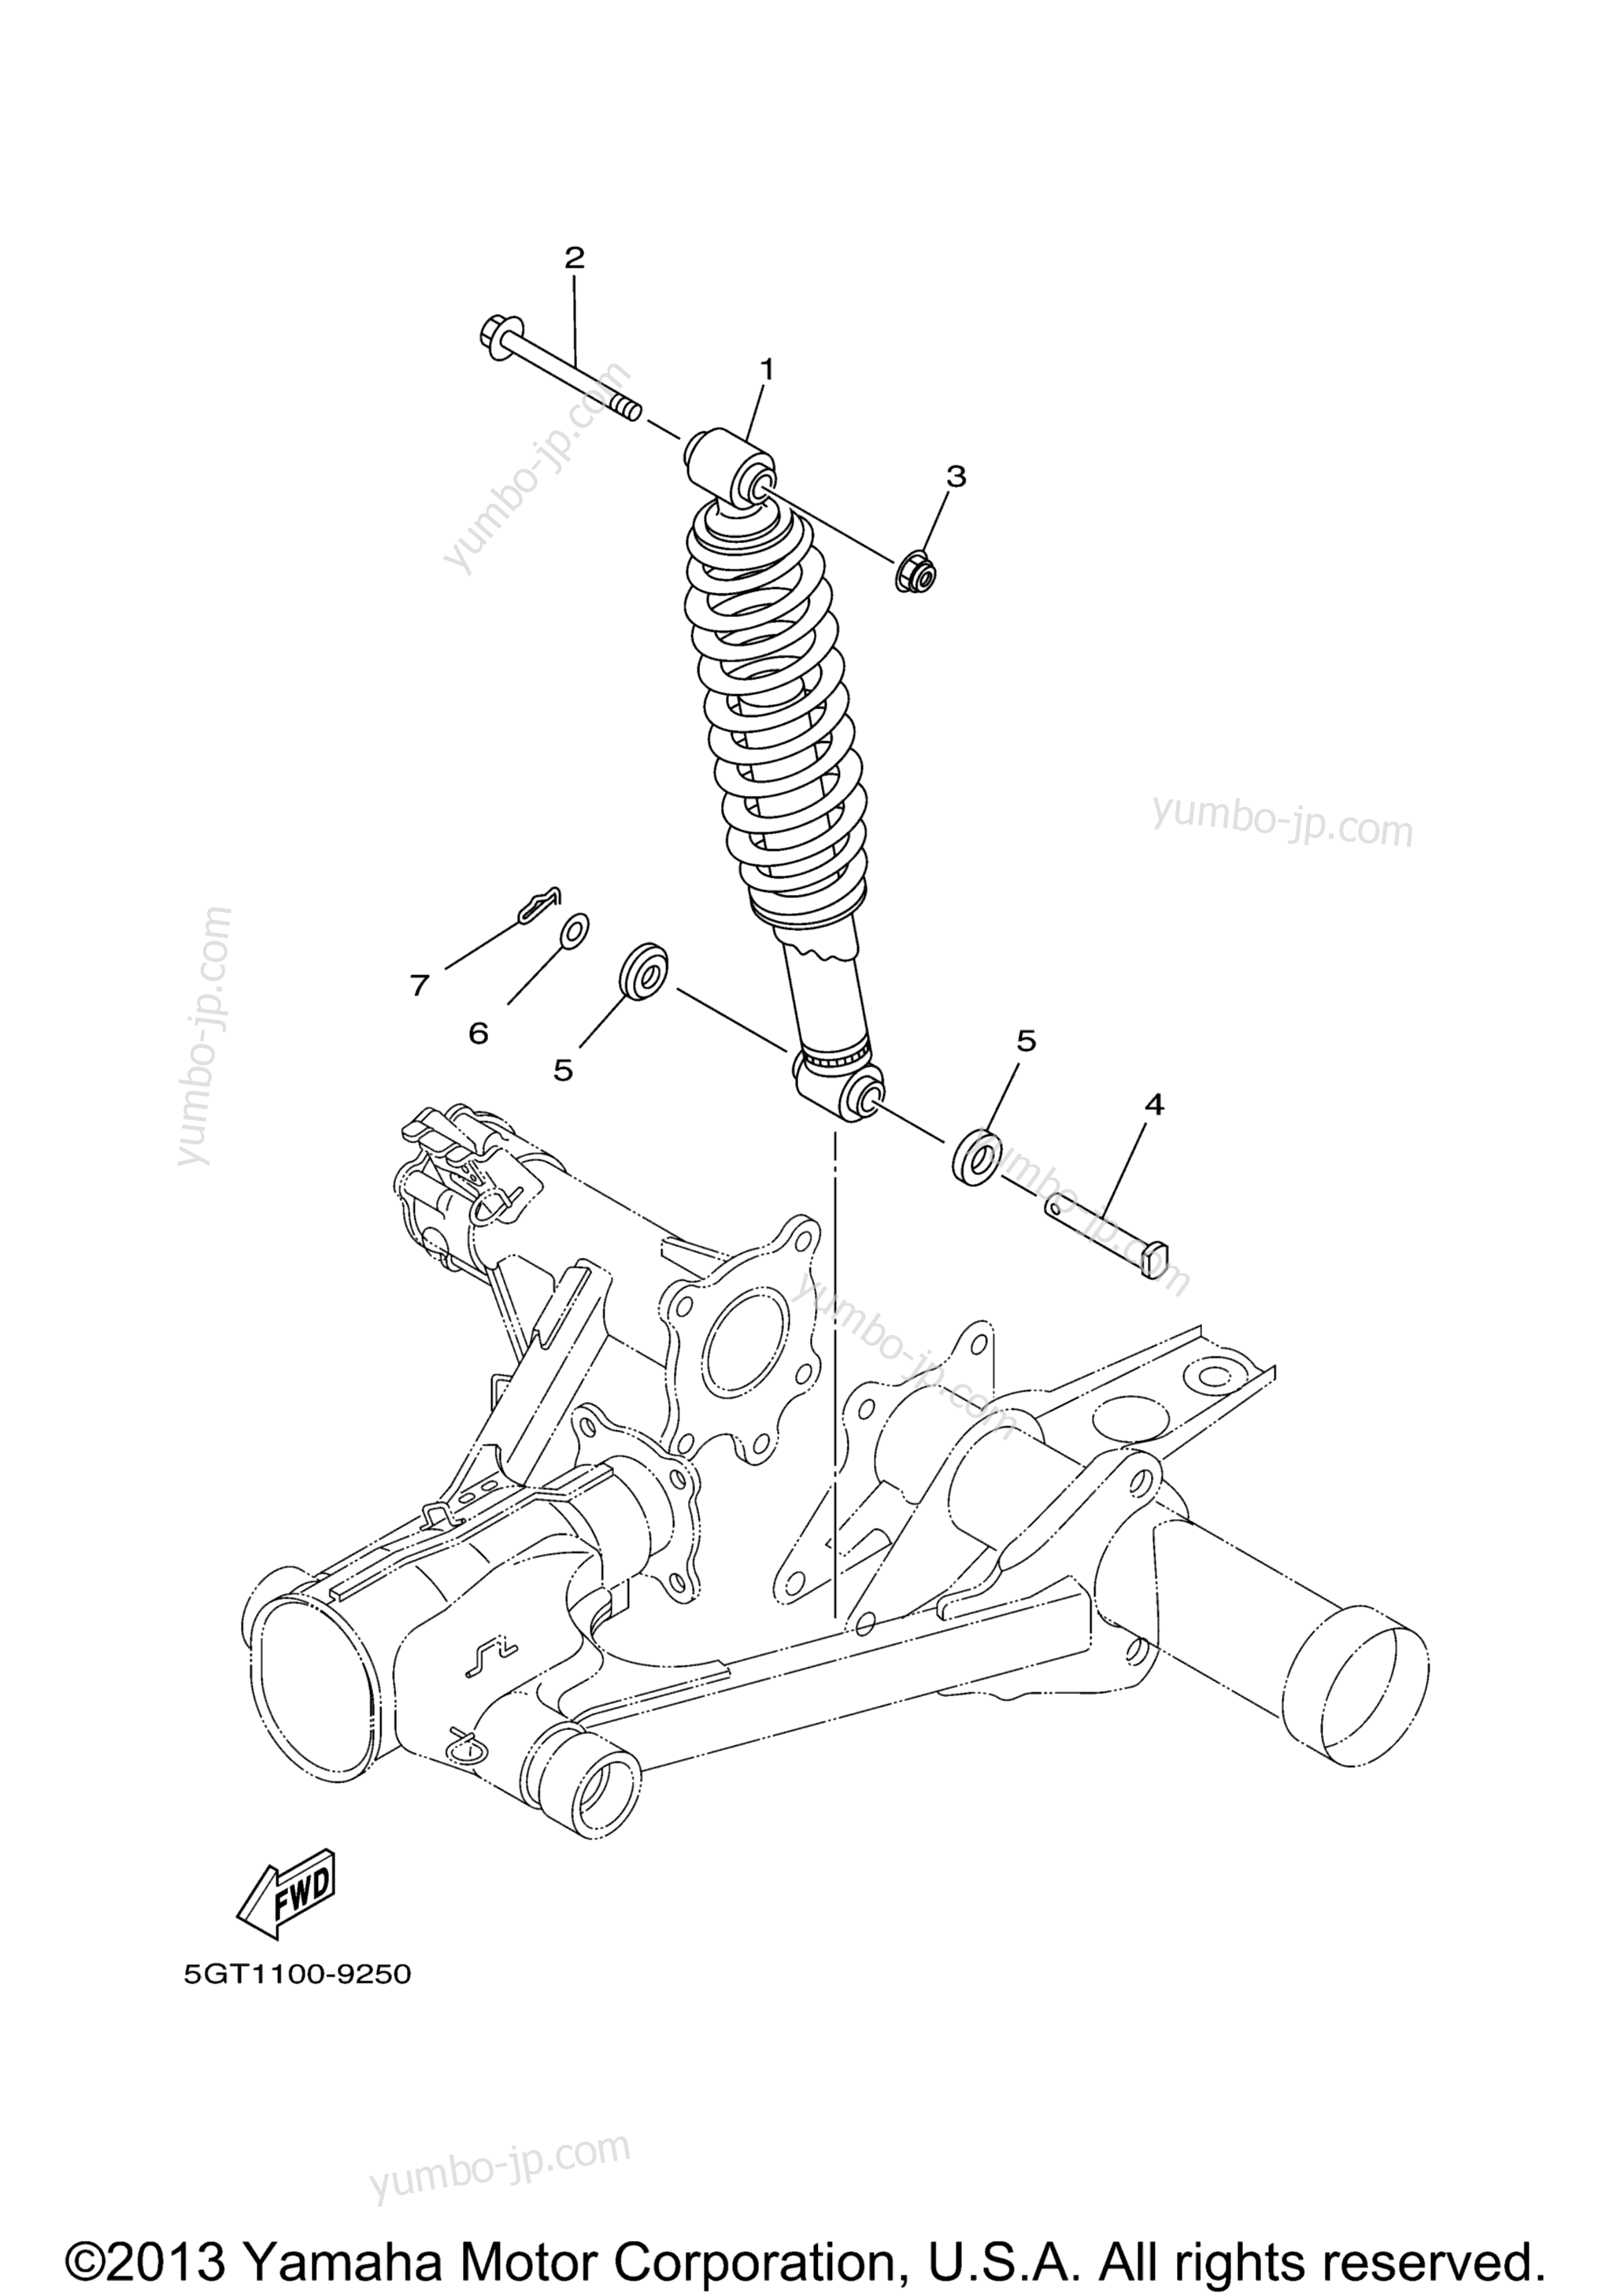 Rear Suspension for ATVs YAMAHA GRIZZLY REALTREE (YFM600FHMC) CA 2000 year